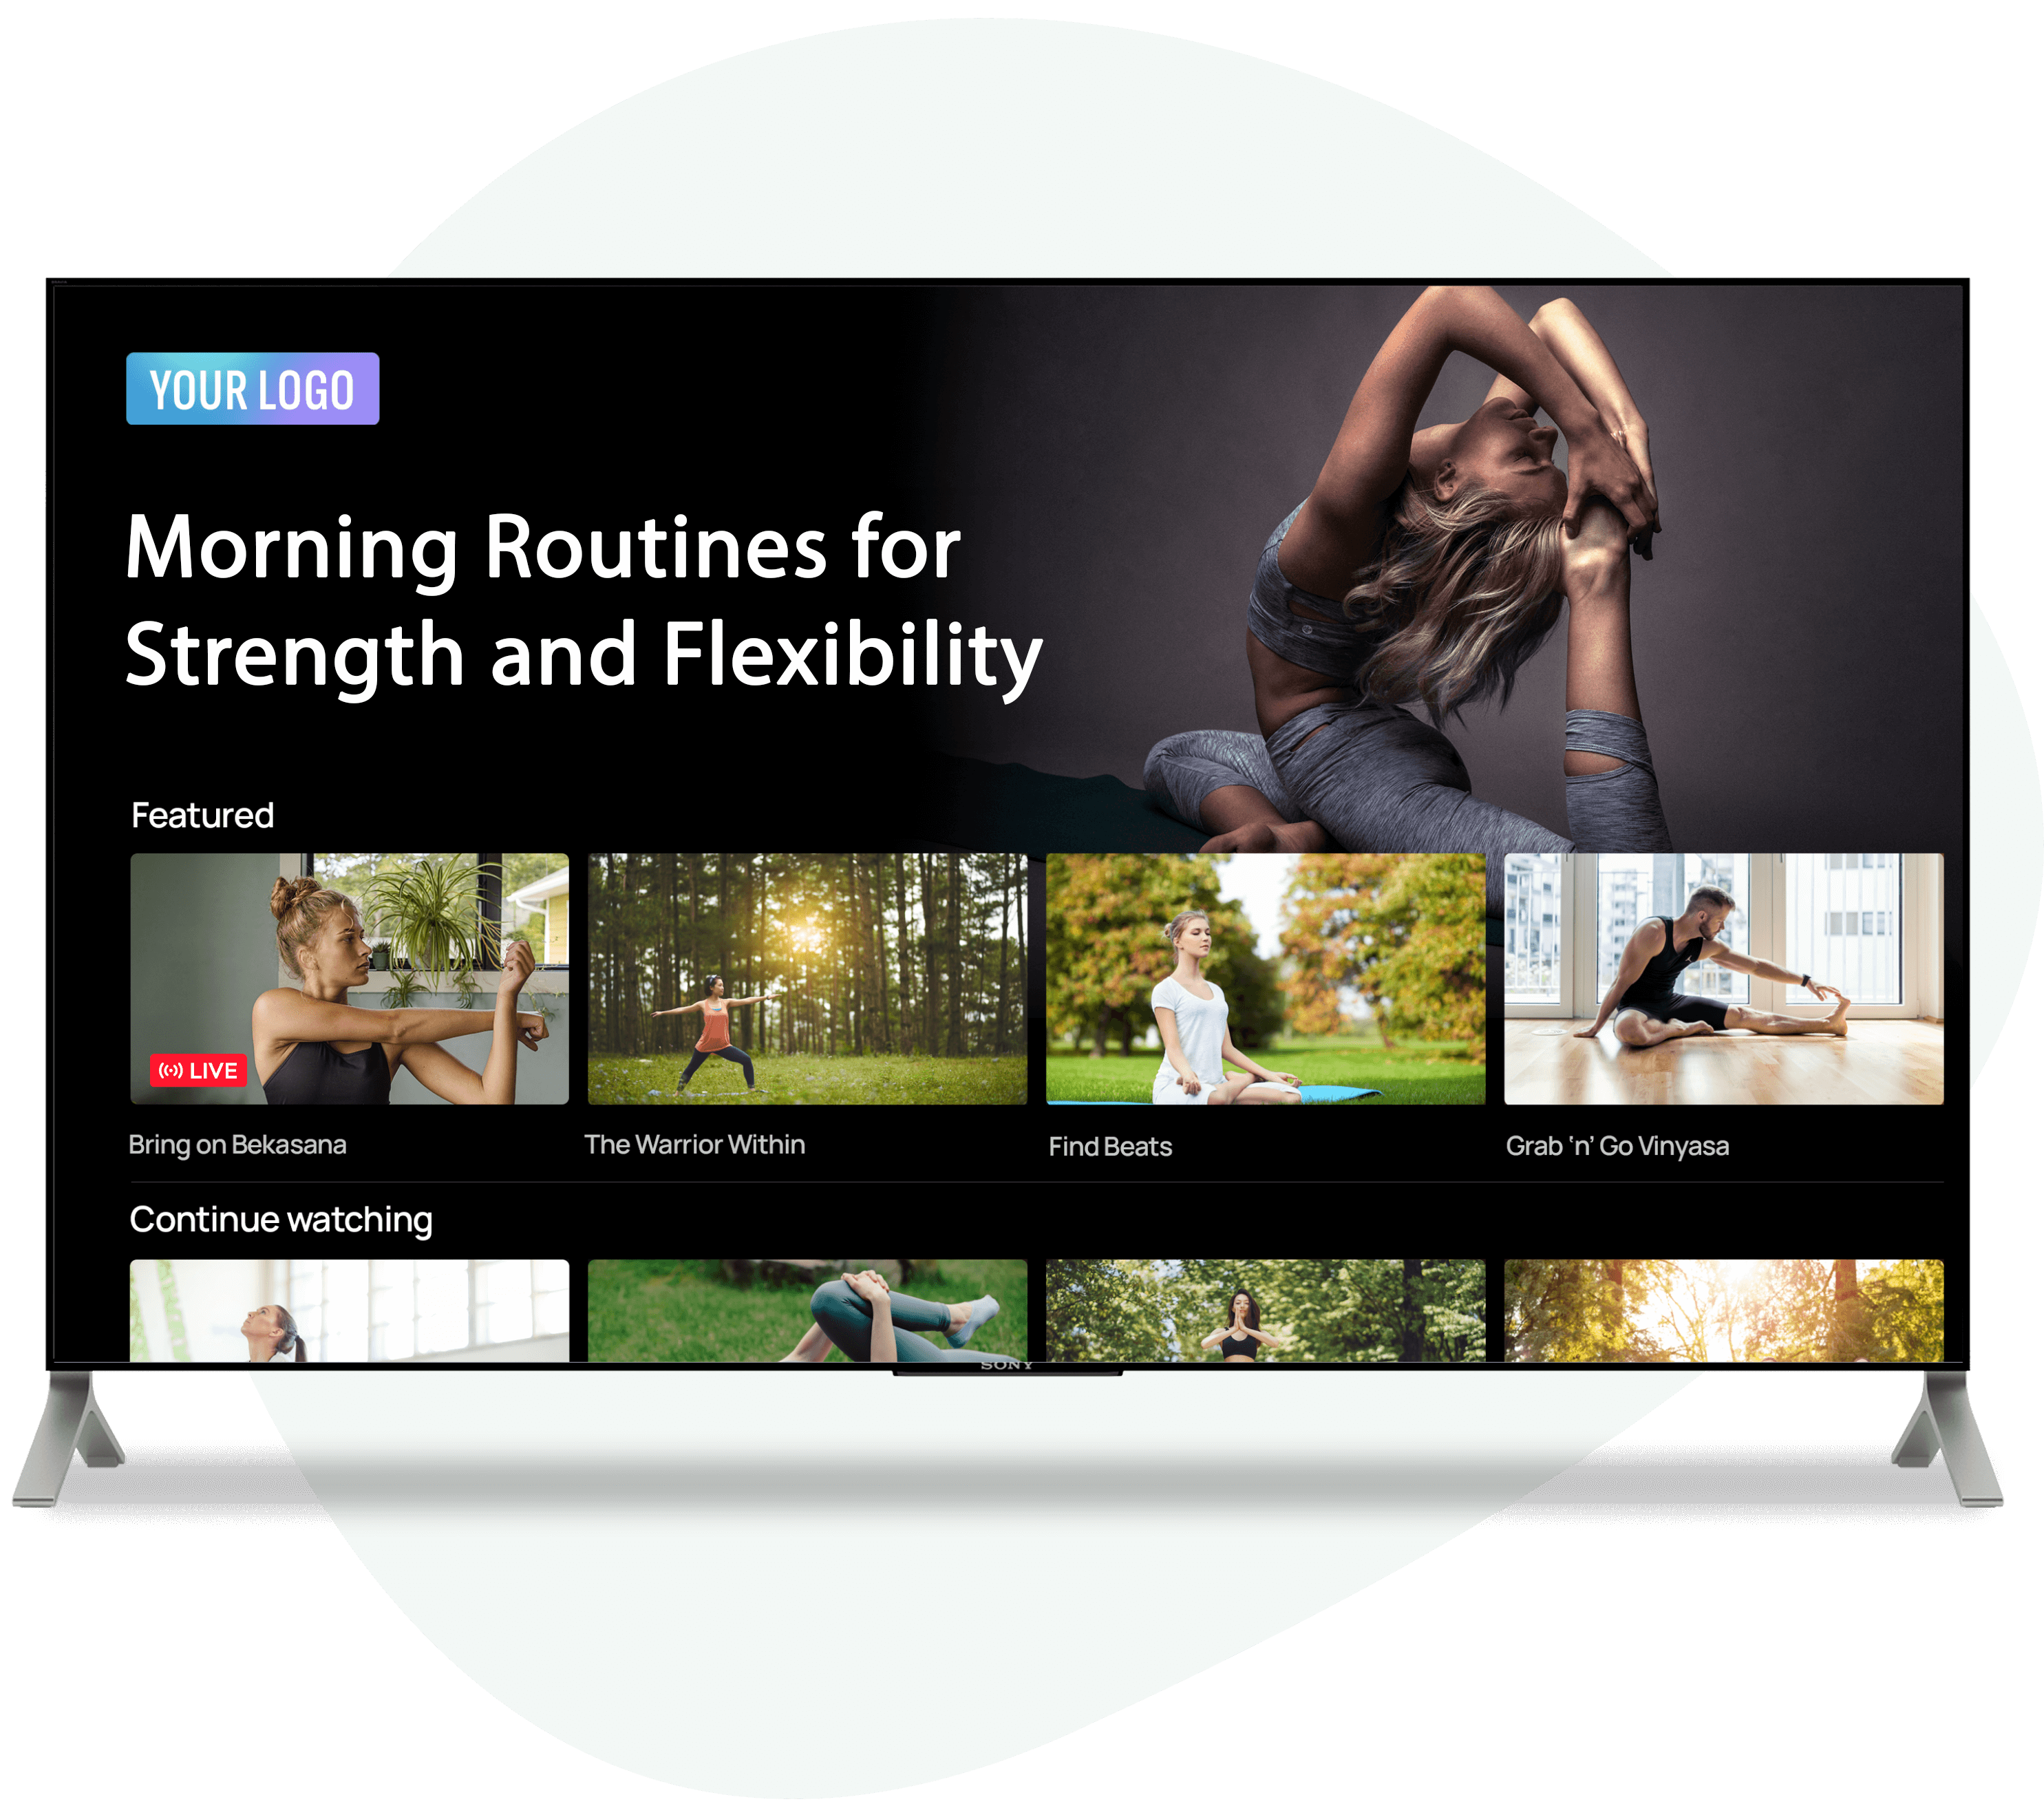 An image of a yoga video catalog featuring a variety of yoga sessions including prenatal yoga, kids yoga, and yoga with pets, available on a tv application.